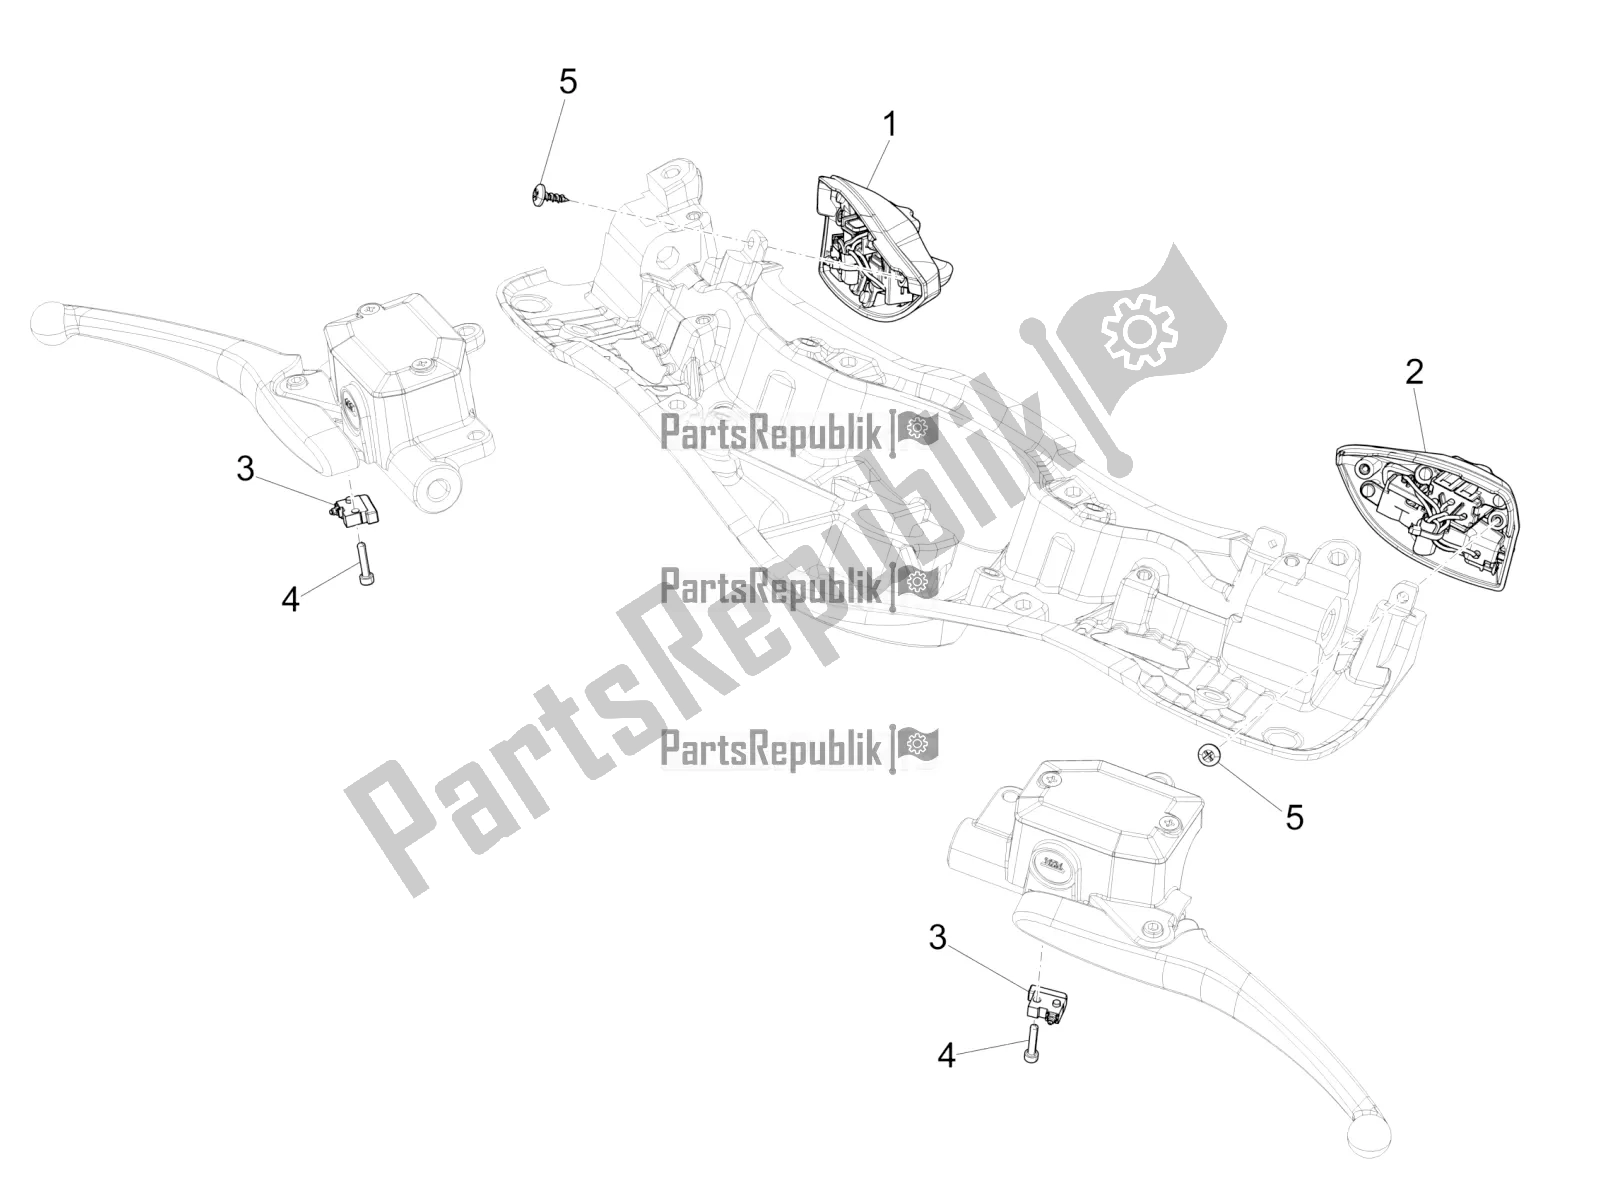 All parts for the Selectors - Switches - Buttons of the Vespa 946 150 ABS CD Apac 2022